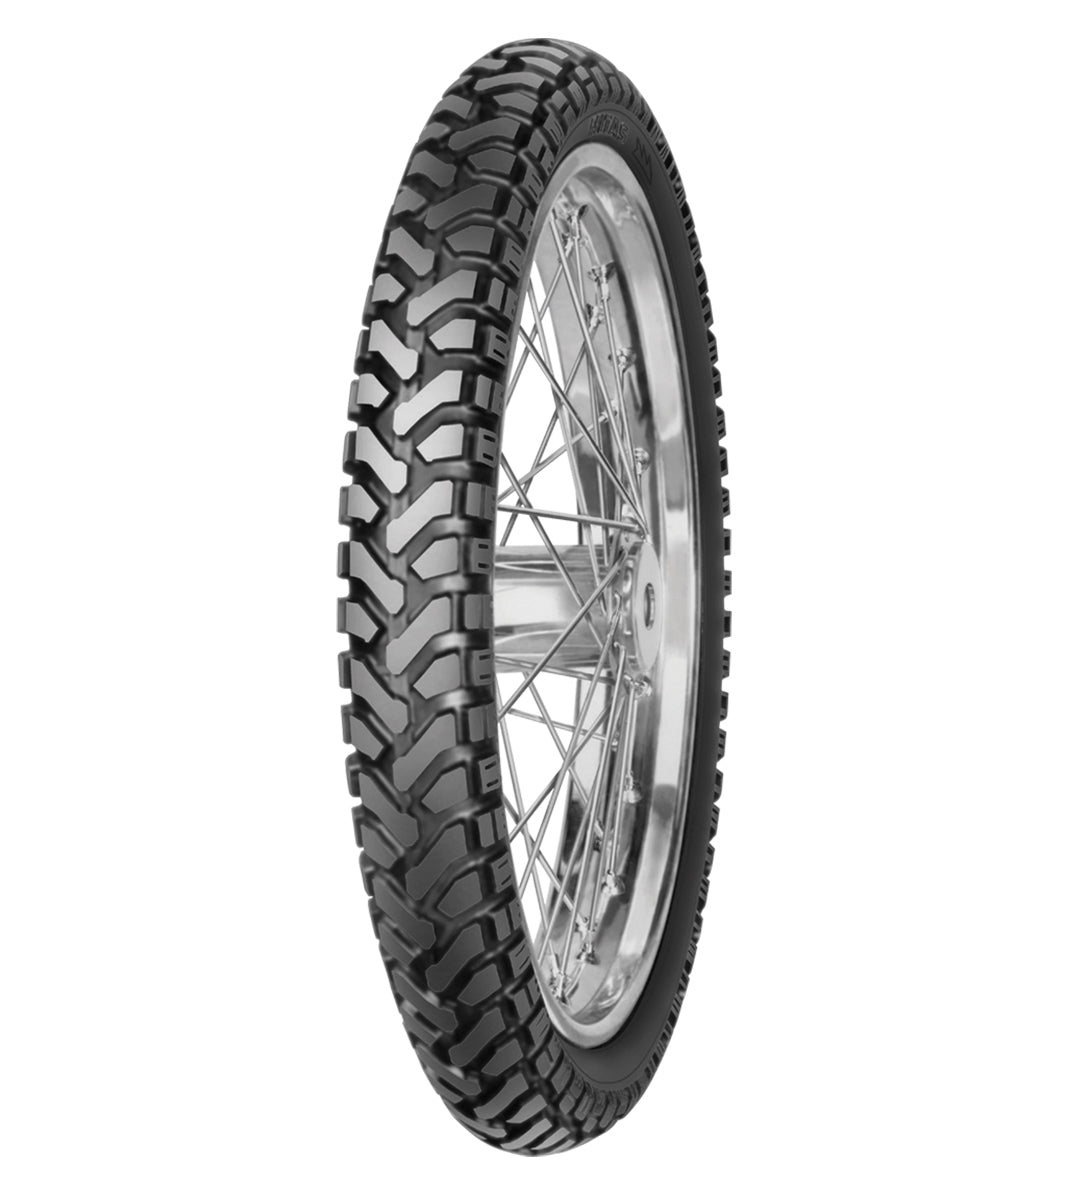 Mitas E-07 ENDURO 90/90-21 Trail OFF Trail DAKAR 54T Yellow Tubeless Front Tire, 224637, 90/90-21, Adventure Touring, E Series, E-07 Enduro, Front, Trail, Trail OFF, Tires - Imported and distributed in North & South America by Lindeco Genuine Powersports - Premier Powersports Equipment and Accessories for Motorcycle Enthusiasts, Professional Riders and Dealers.